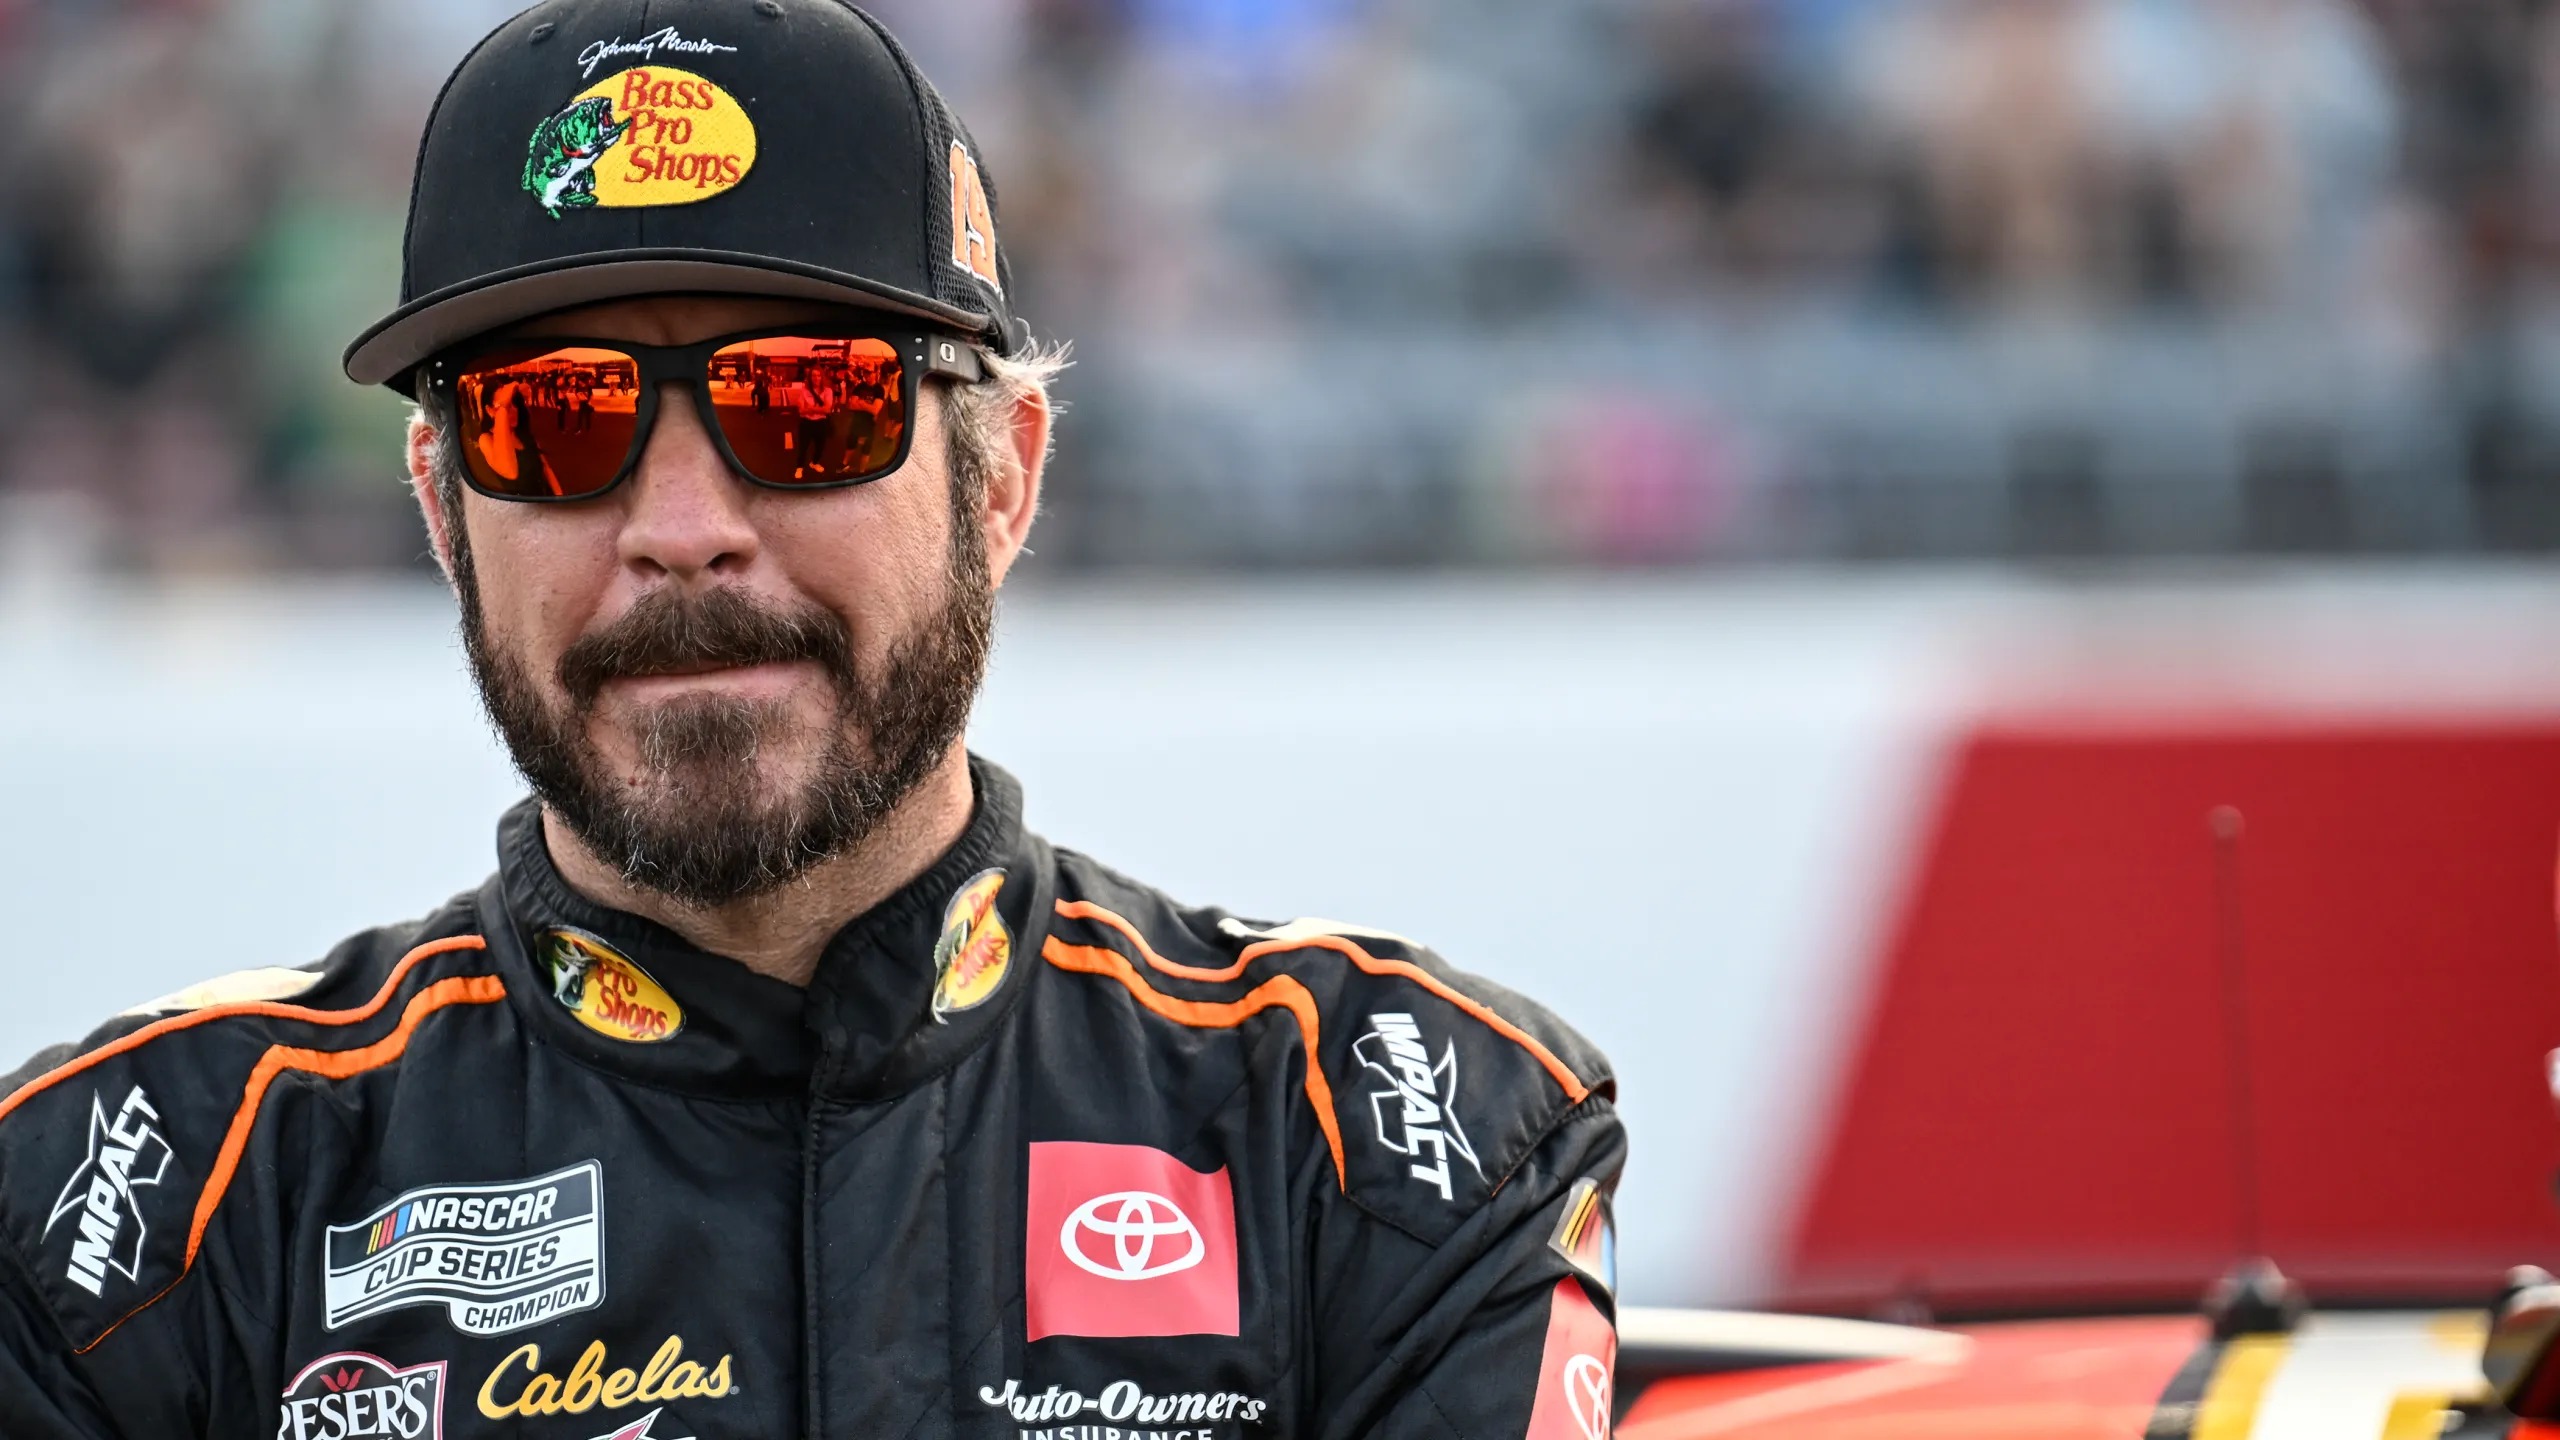 GOOD NEWS: NASCAR Top Talented Key Star Martin Truex Jr Of Joe Gibbs Racing Announce To Add One Year To Race In NASCAR….see why